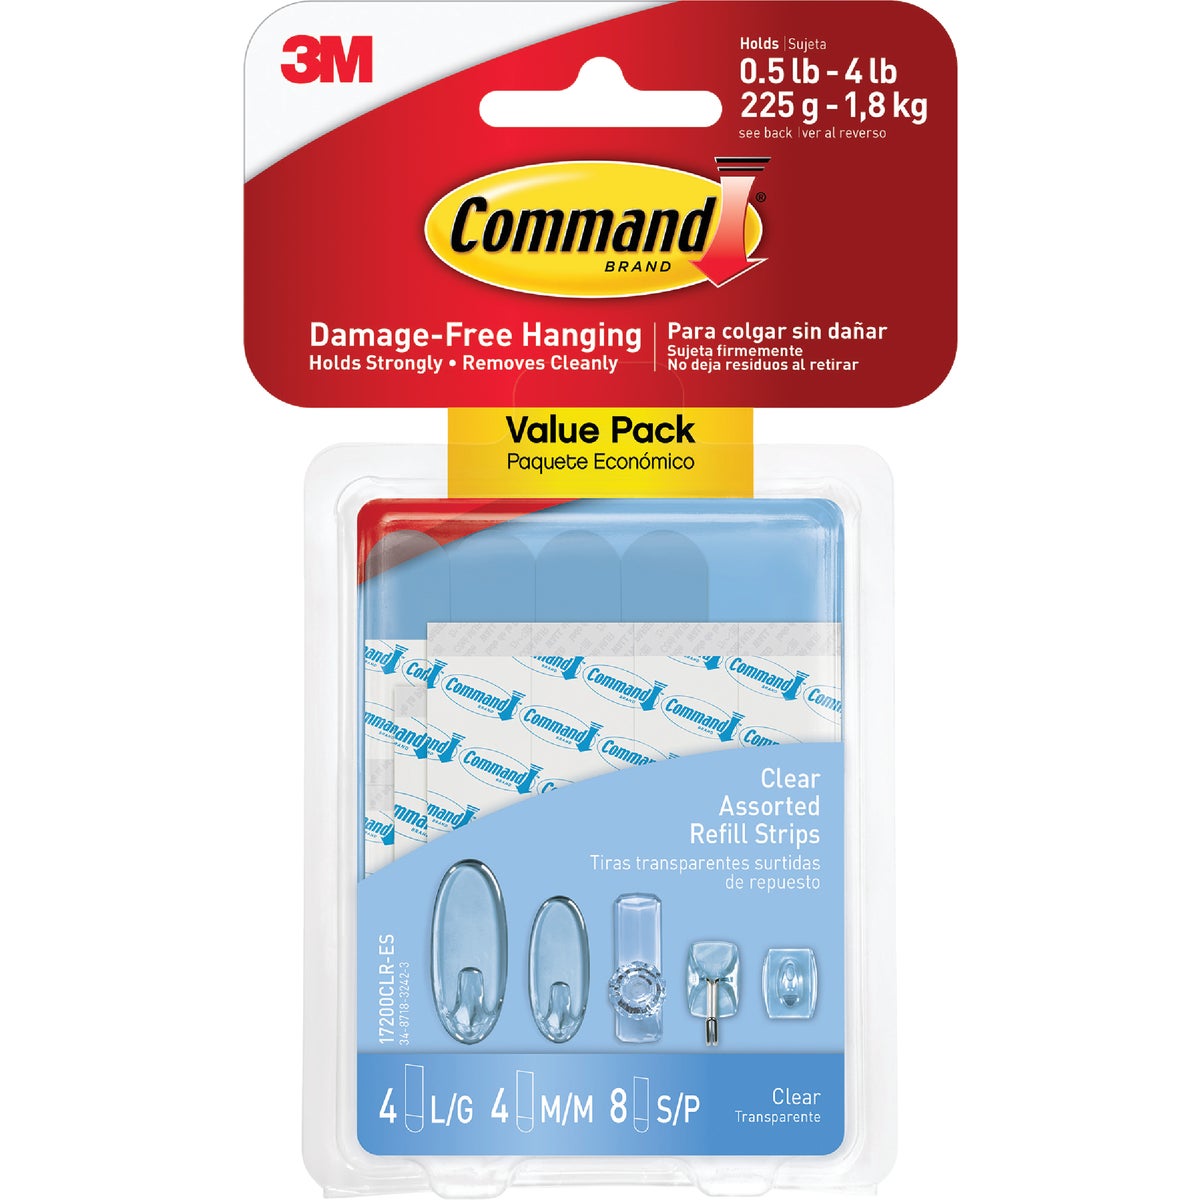 Item 241143, Command Clear Refill Strips make it easy to move and rehang your Command 